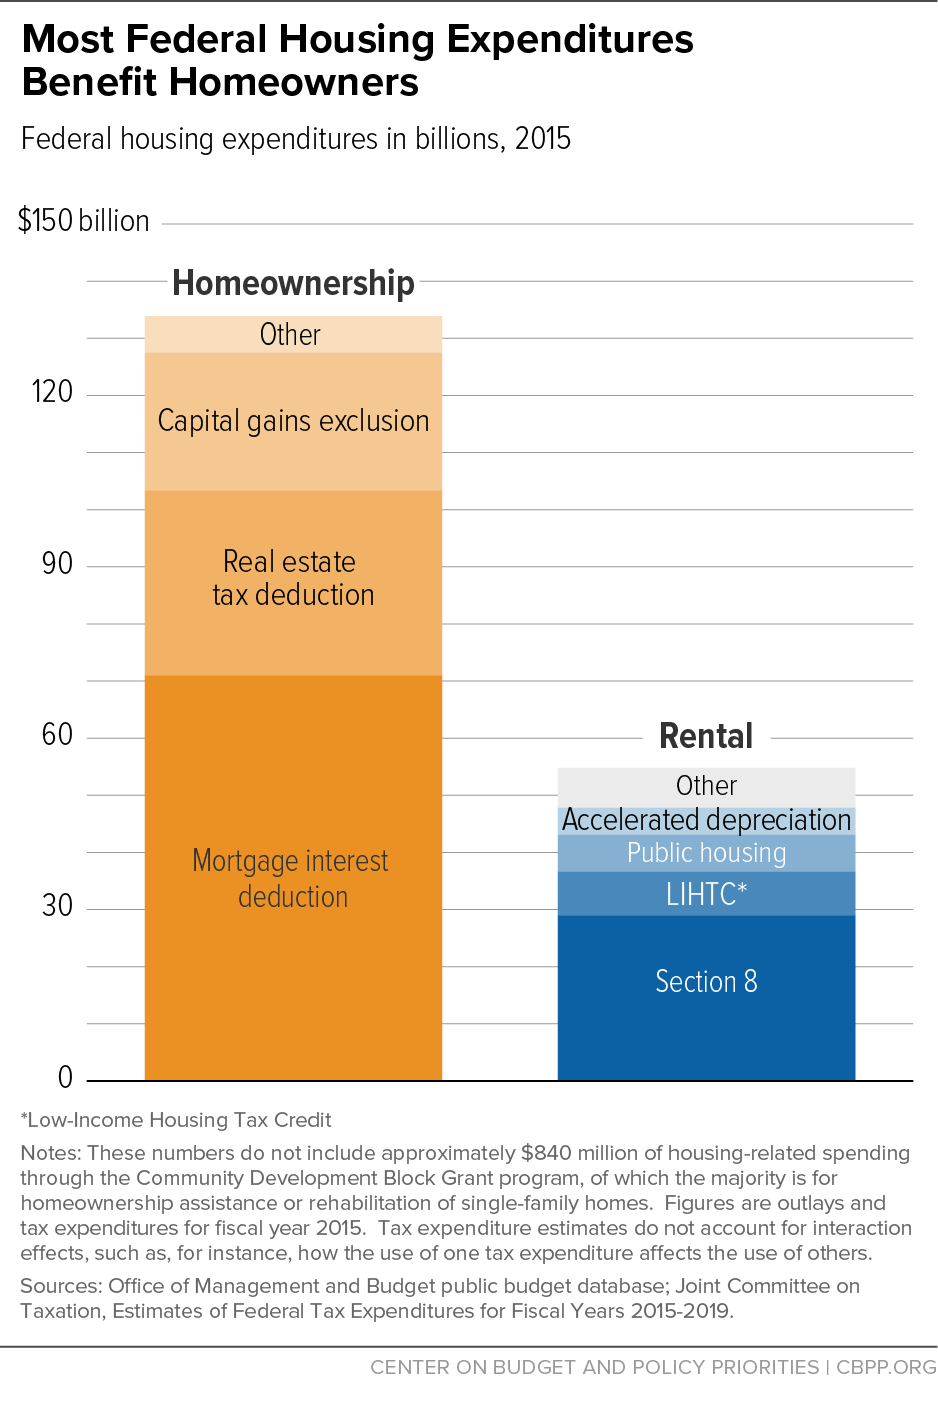 Most Federal Housing Expenditures Benefit Homeowners